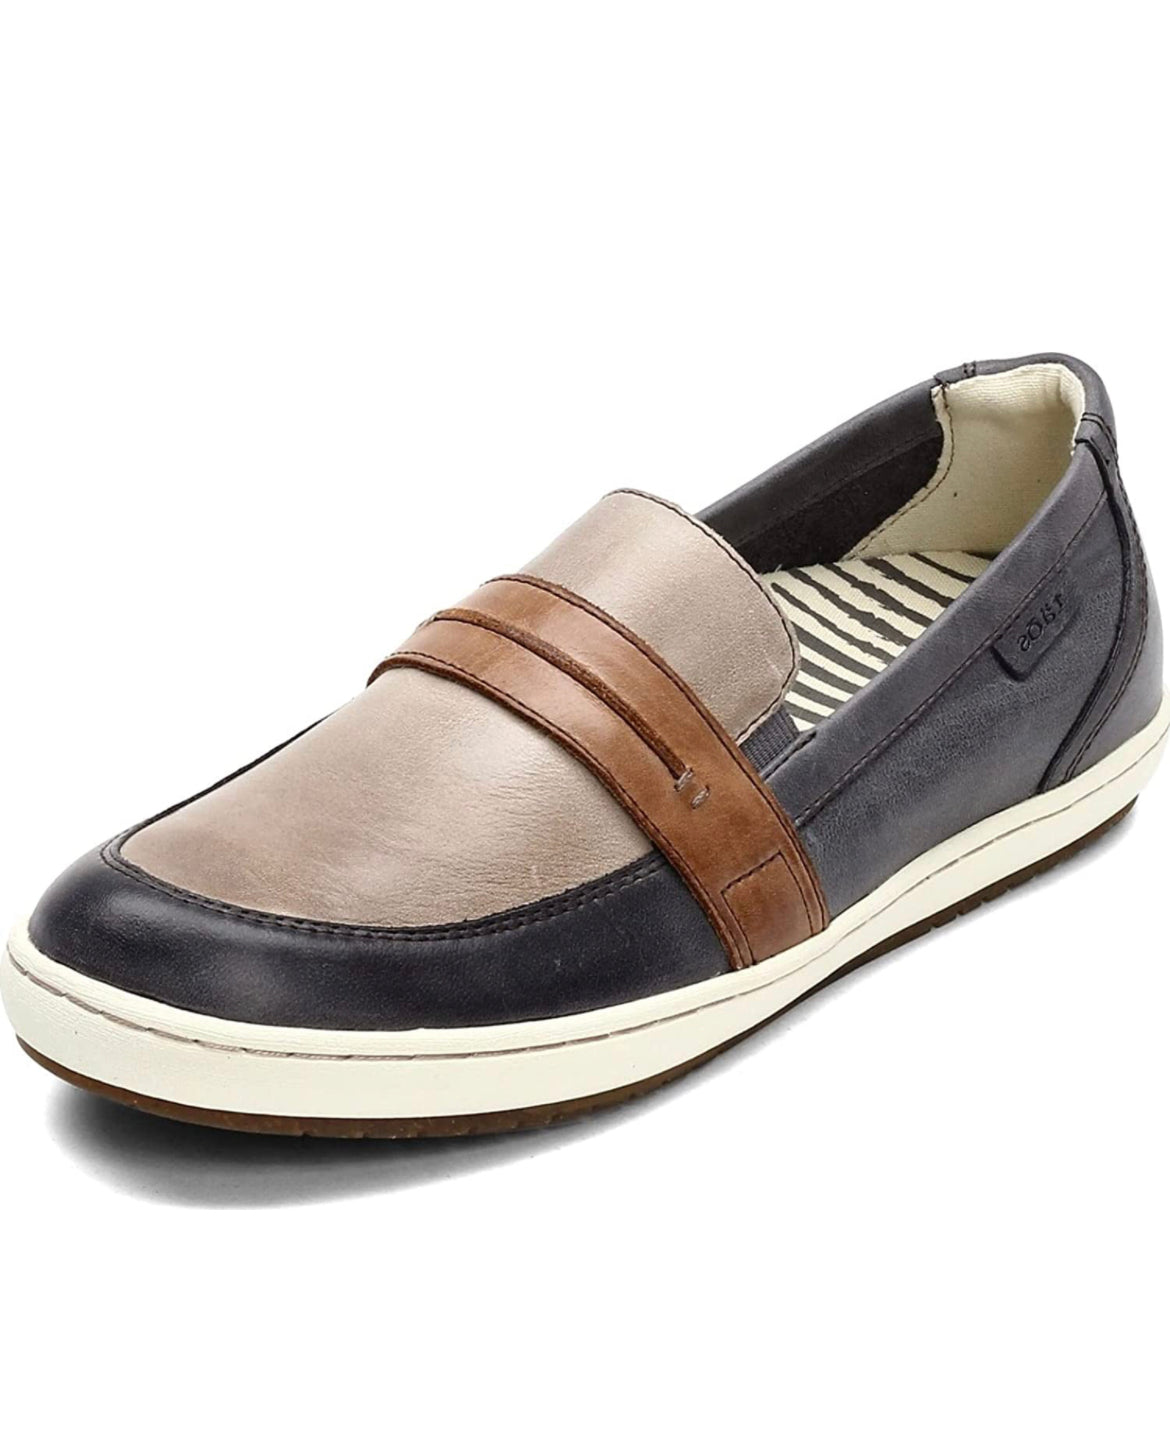 Taos Upward Steel/Taupe Women’s Shoe - All Mixed Up 